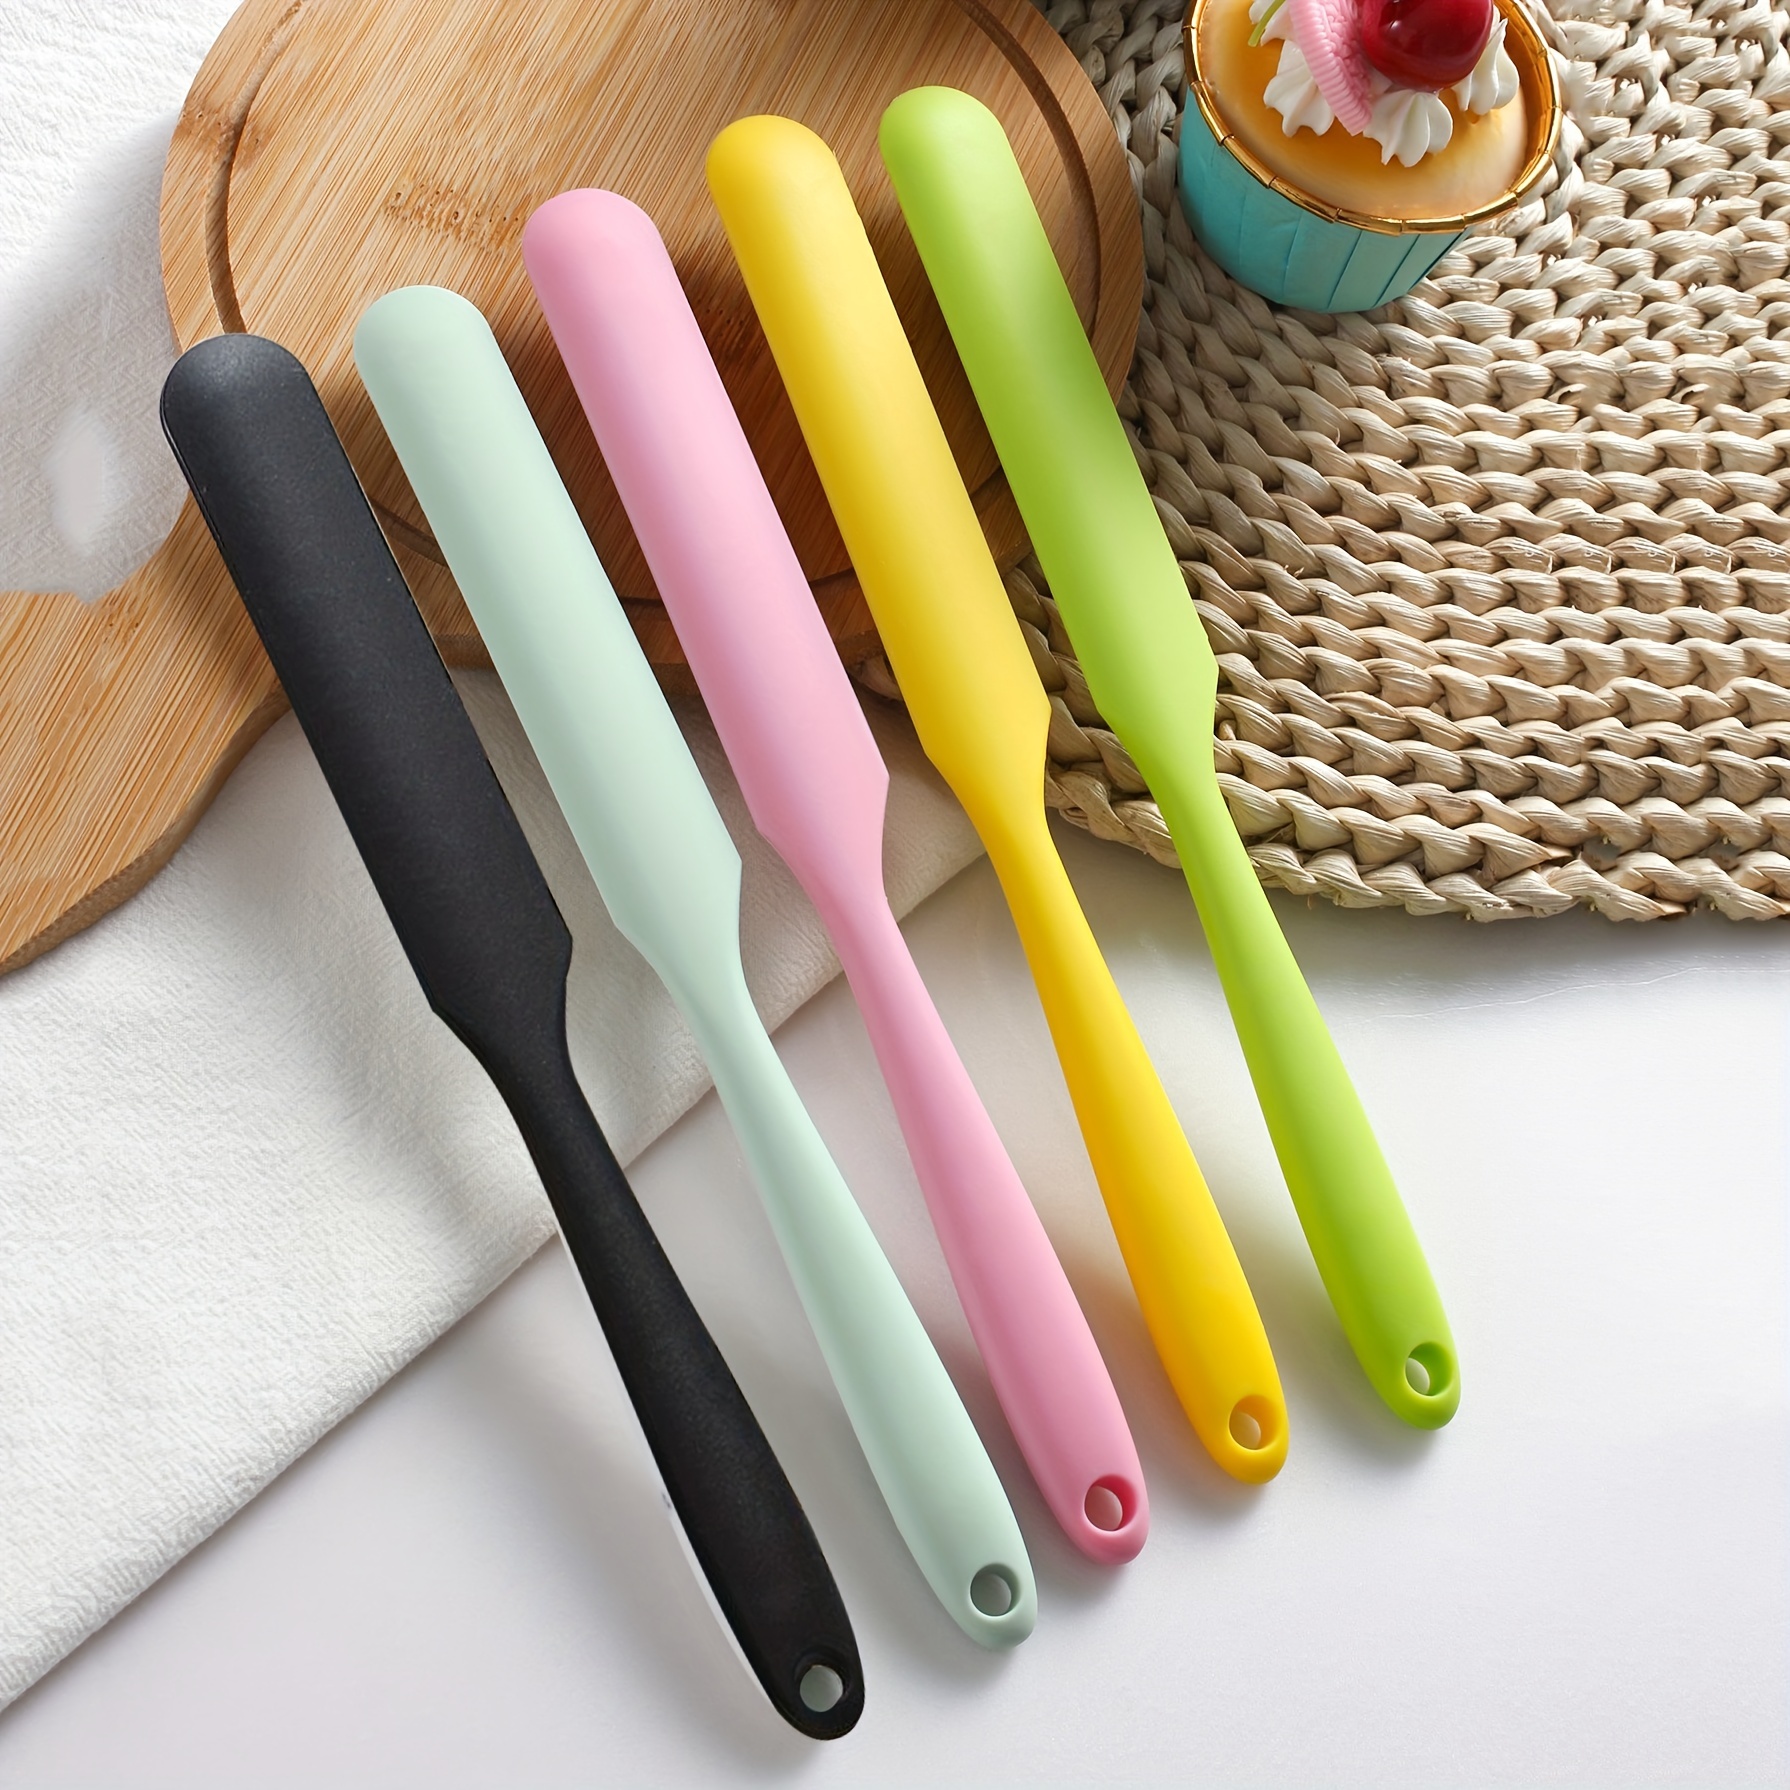 Silicone Spatula Set, 4 PCS Colorful Cake Cream Butter Spatula, Kitchen  Silicone Mixing Scraper Tool for Cooking and Baking 